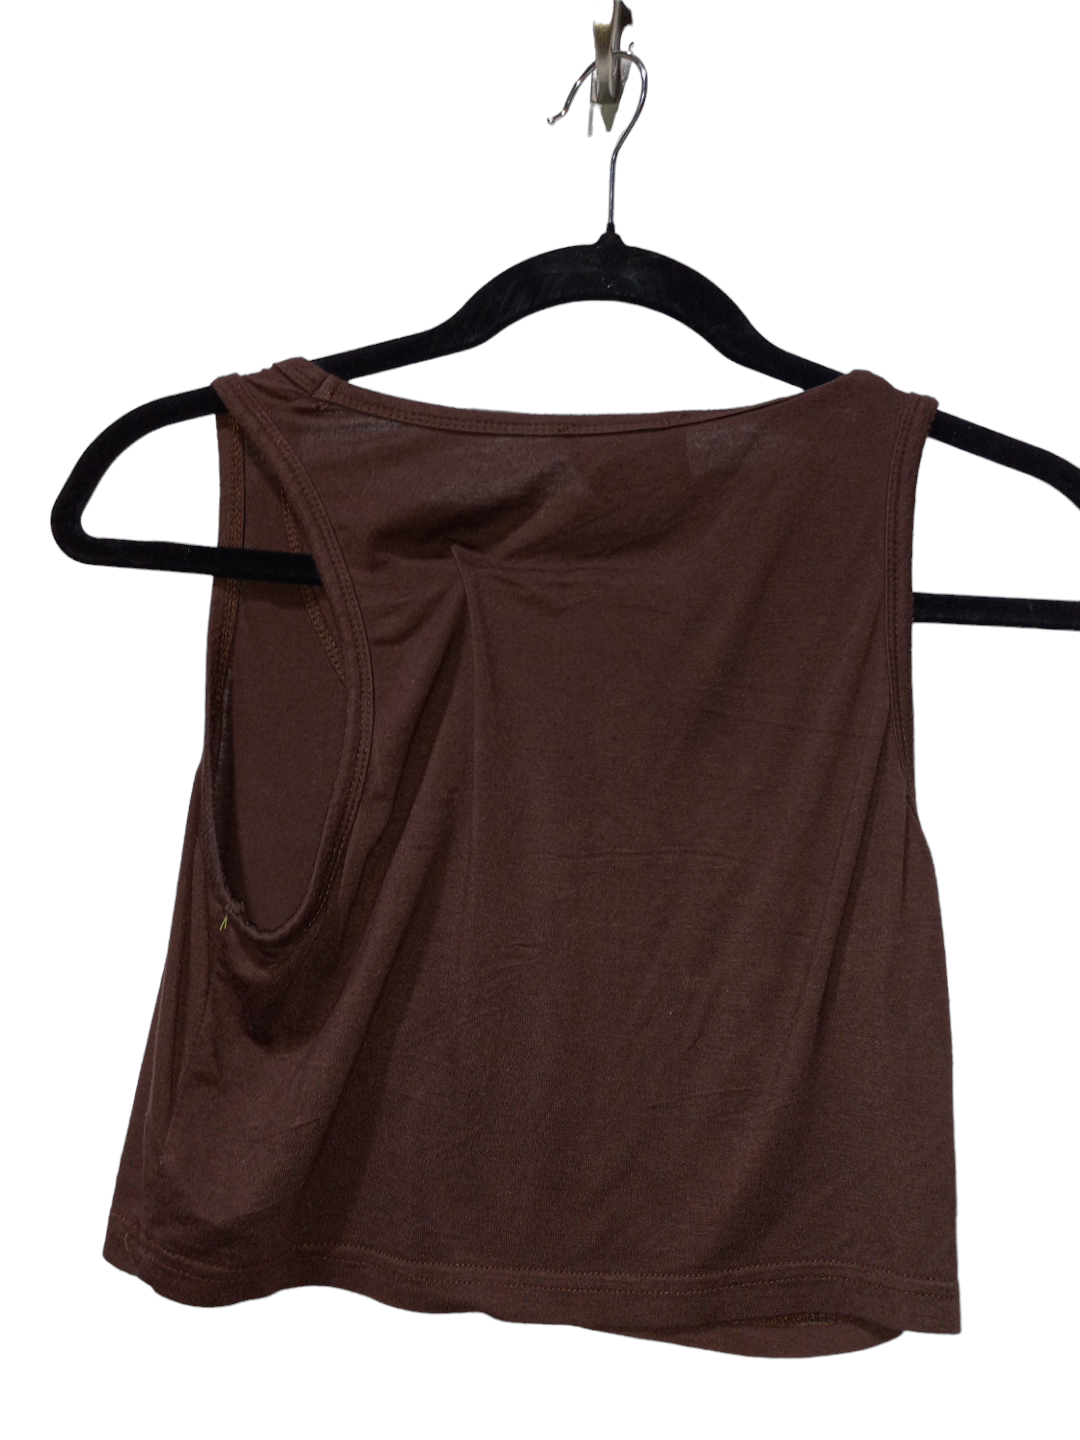 Brown Top Sleeveless Clothes Mentor, Size S